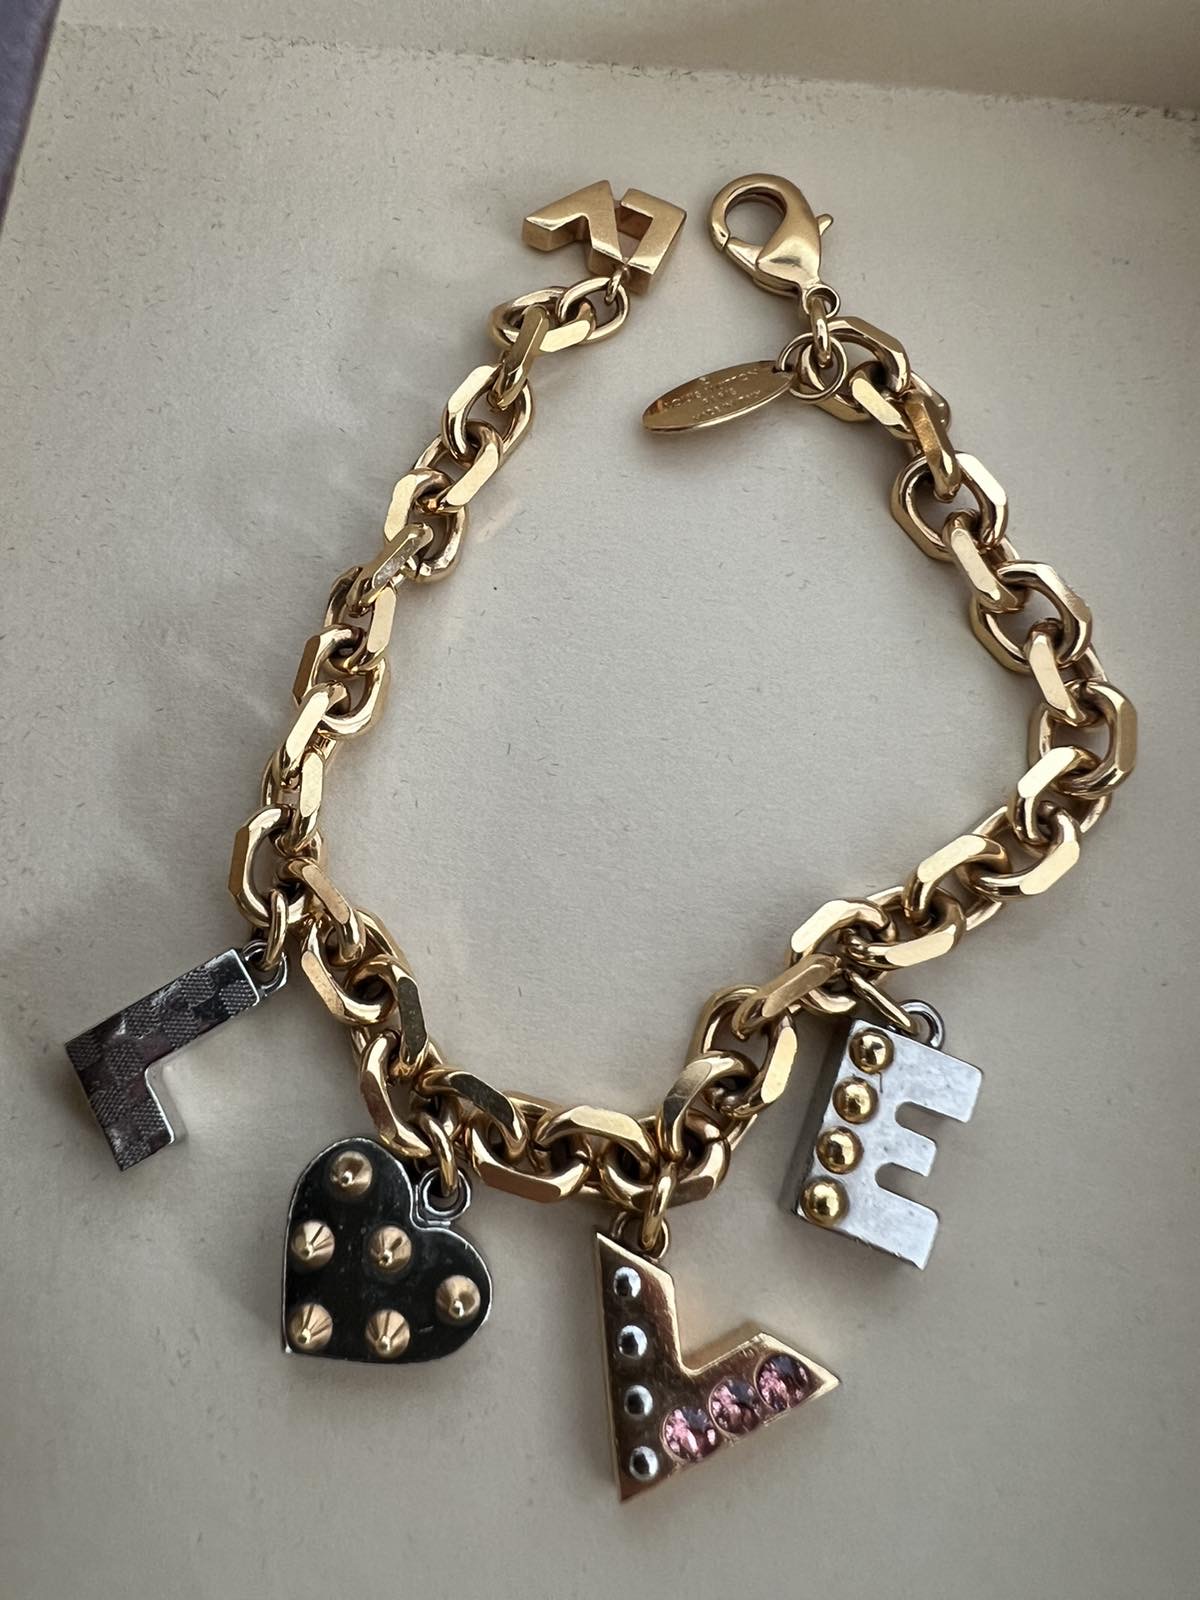 Shop Louis Vuitton Fall In Love Bracelet (M00466) by えぷた